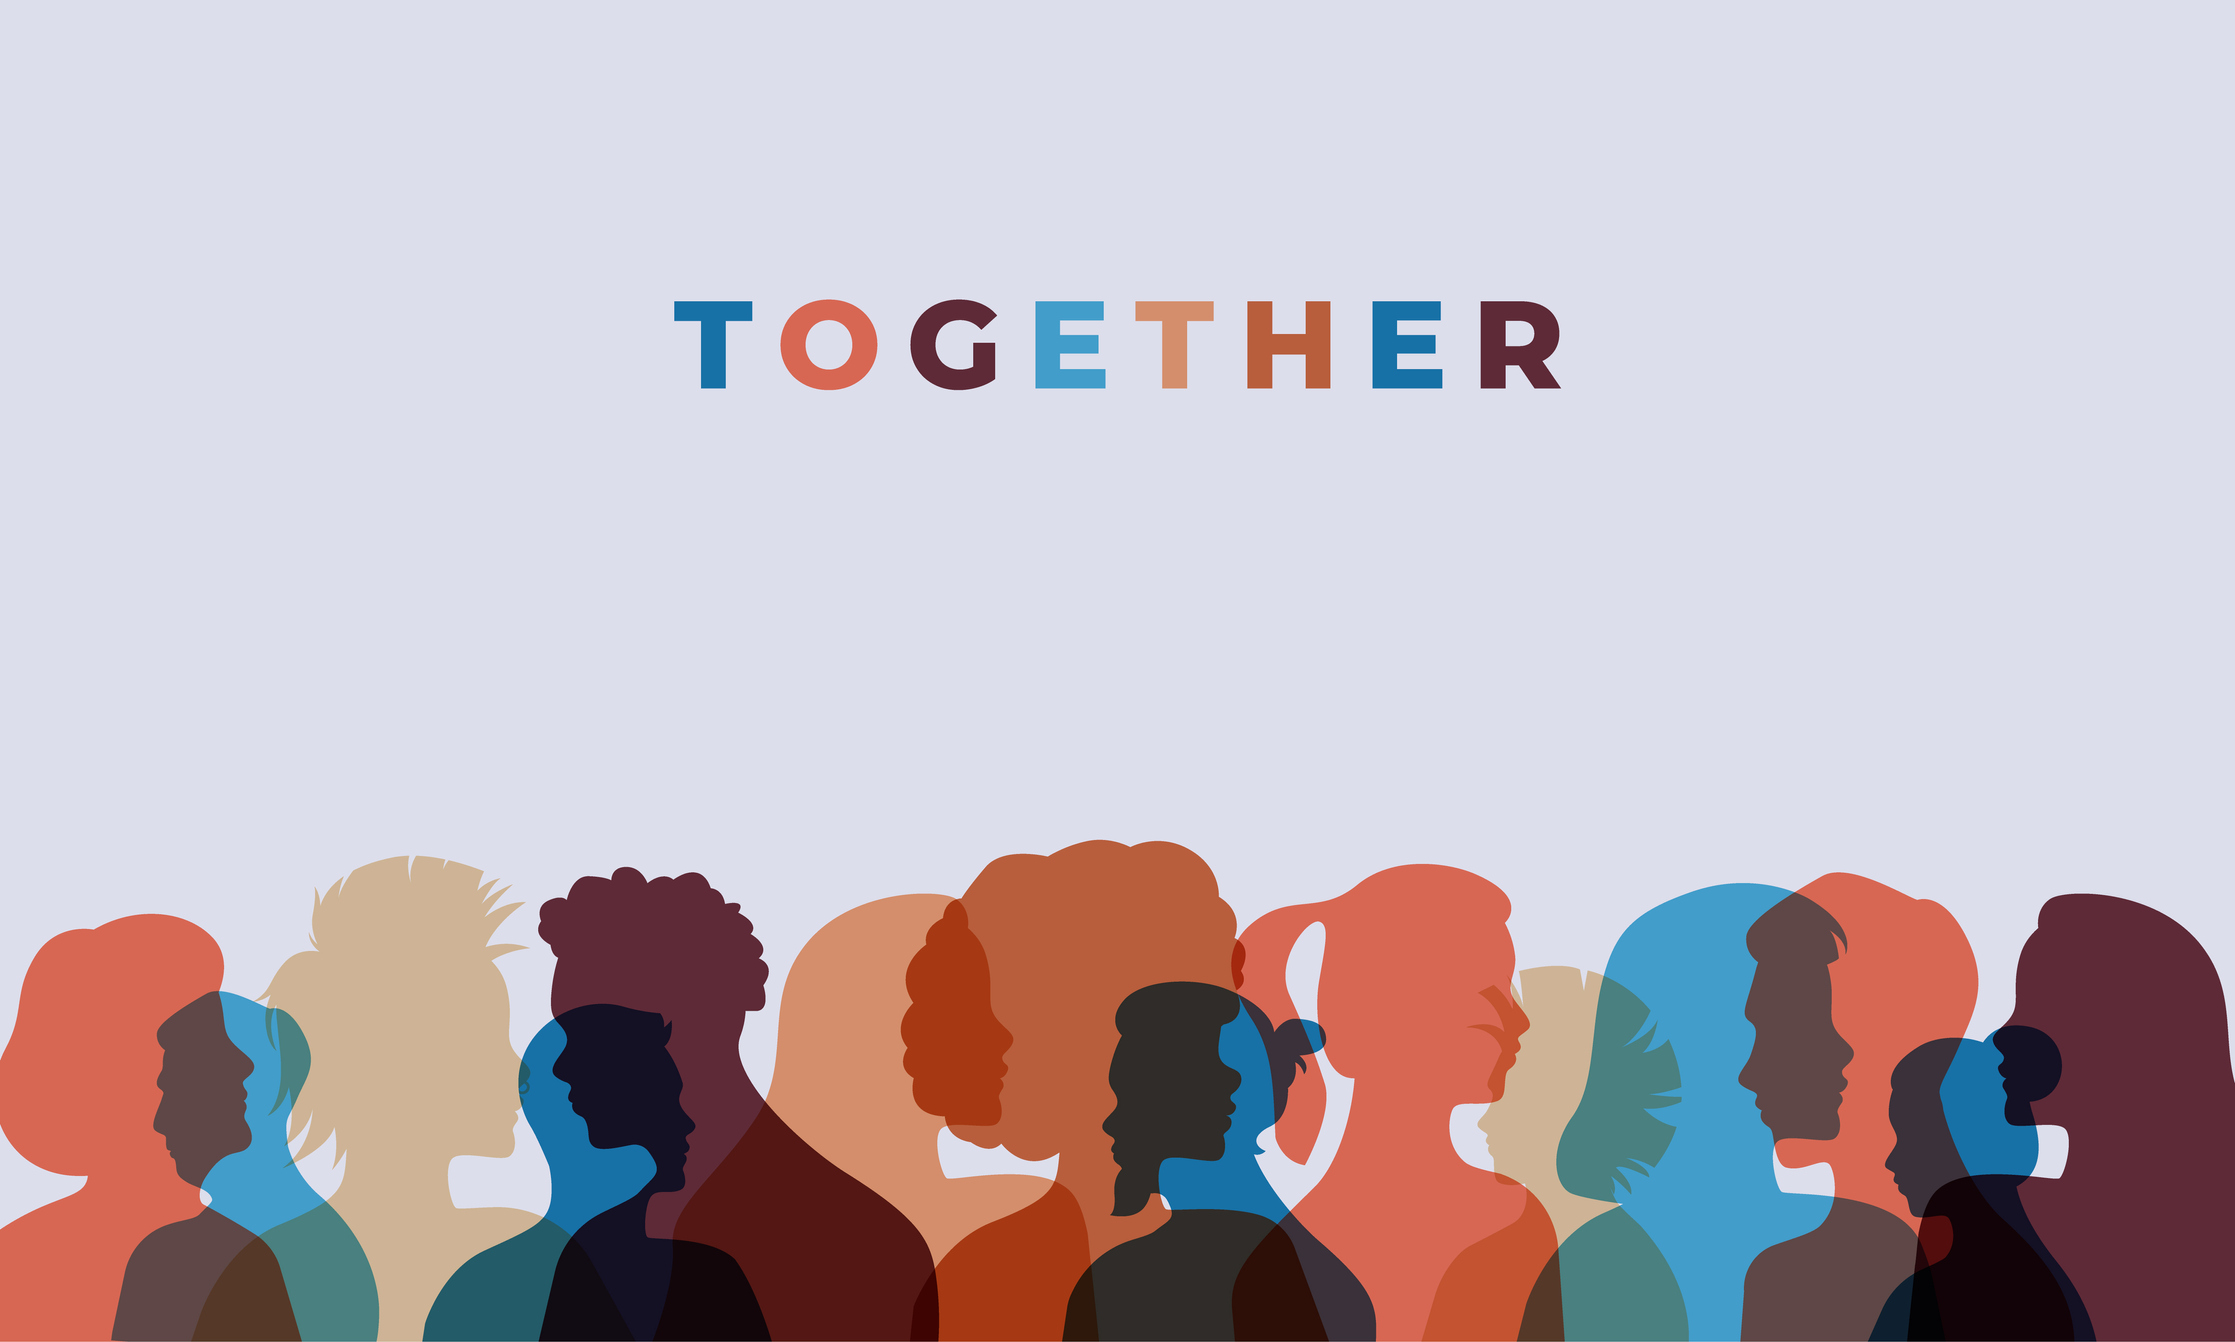 Together colorful quote illustration with diverse faces in transparent color design. 